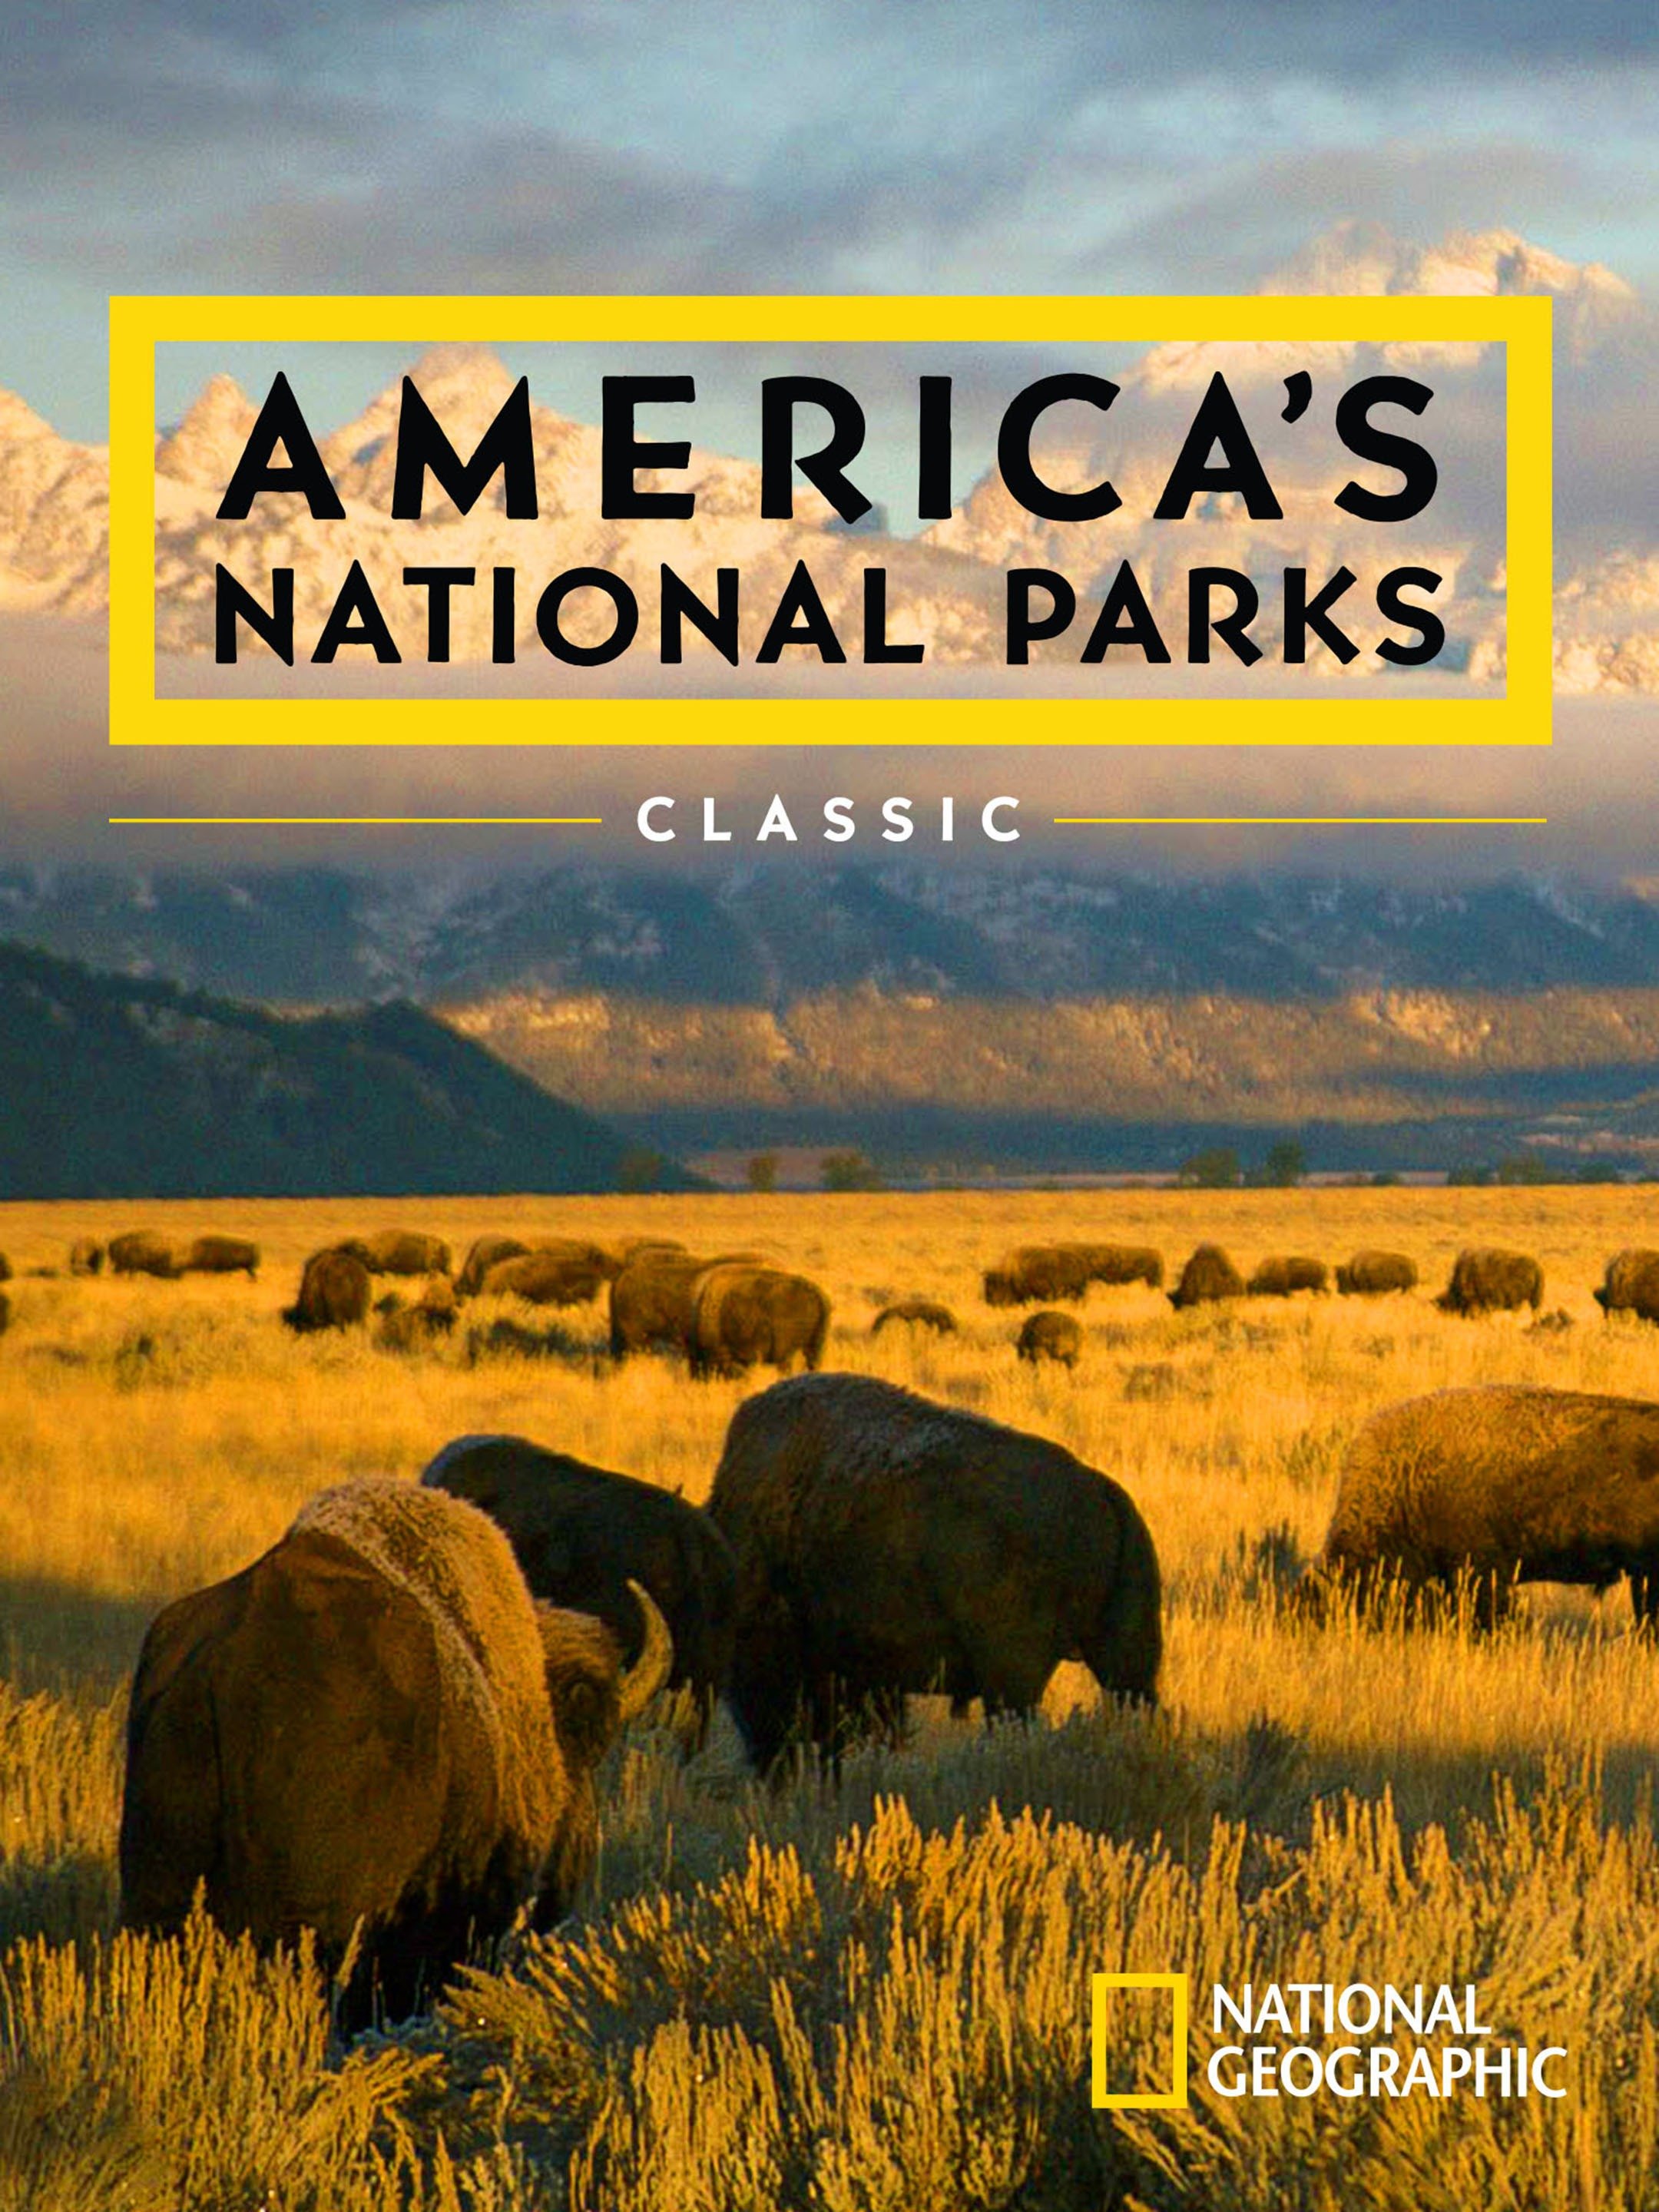 Americas National Parks pic photo